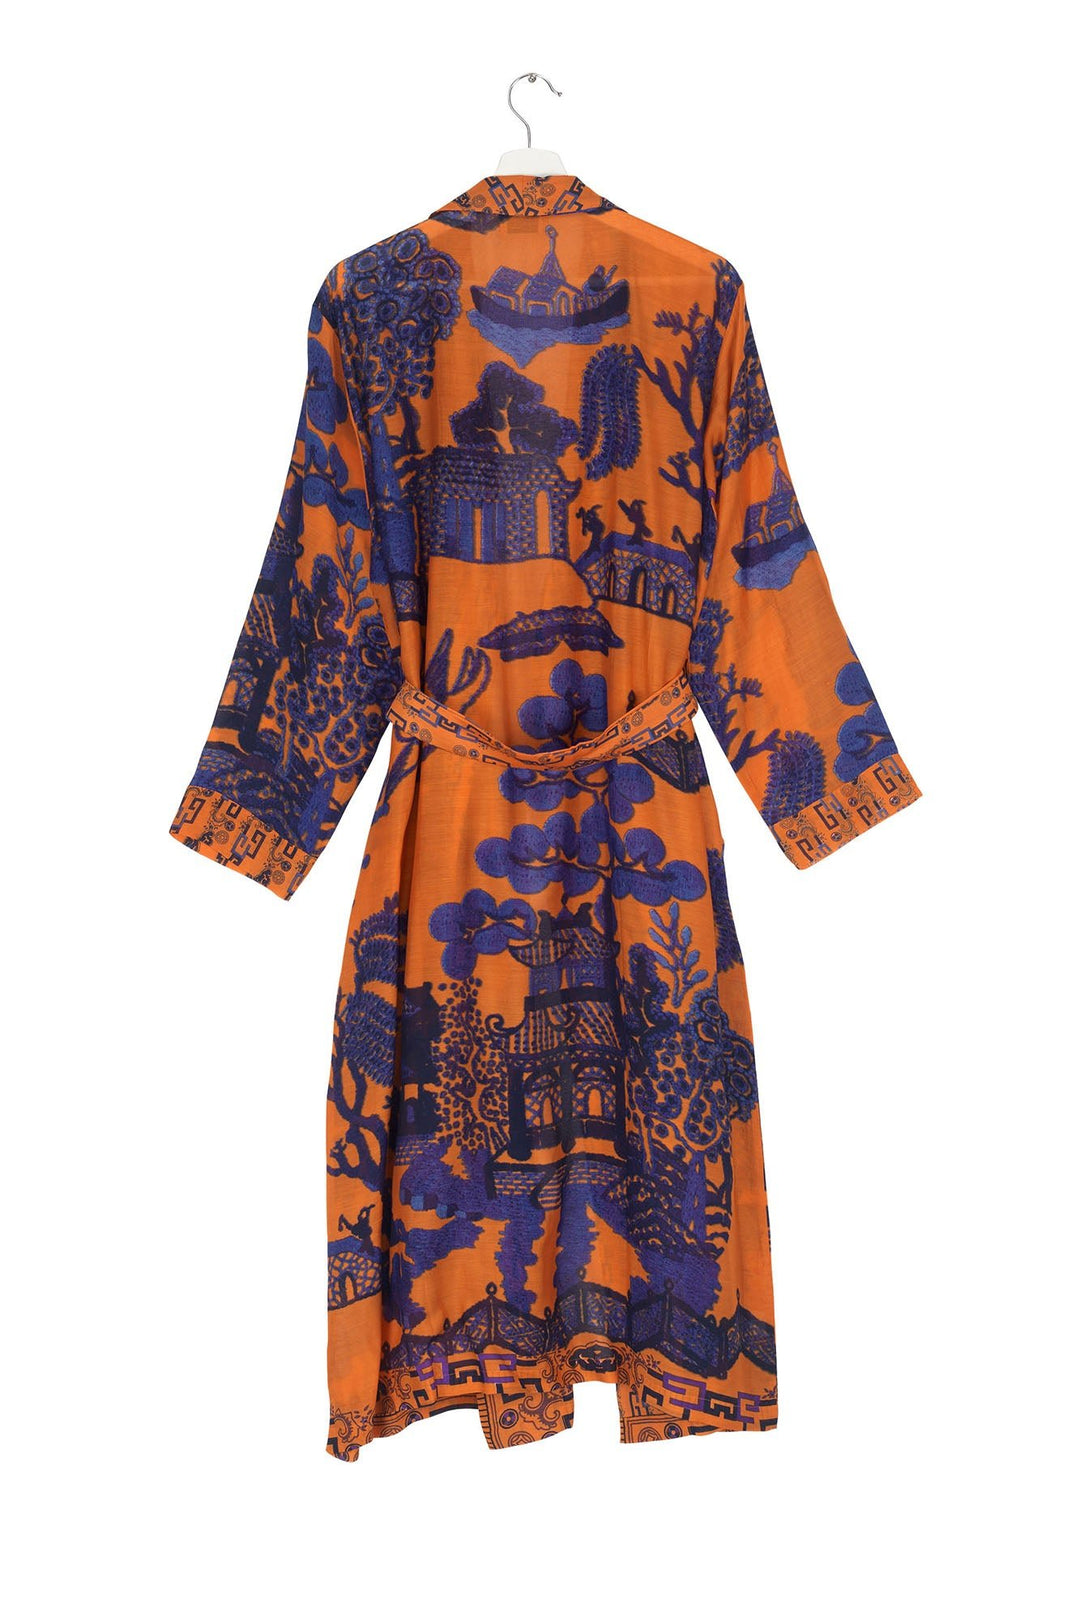 Giant Willow Orange Gown - One Hundred Stars